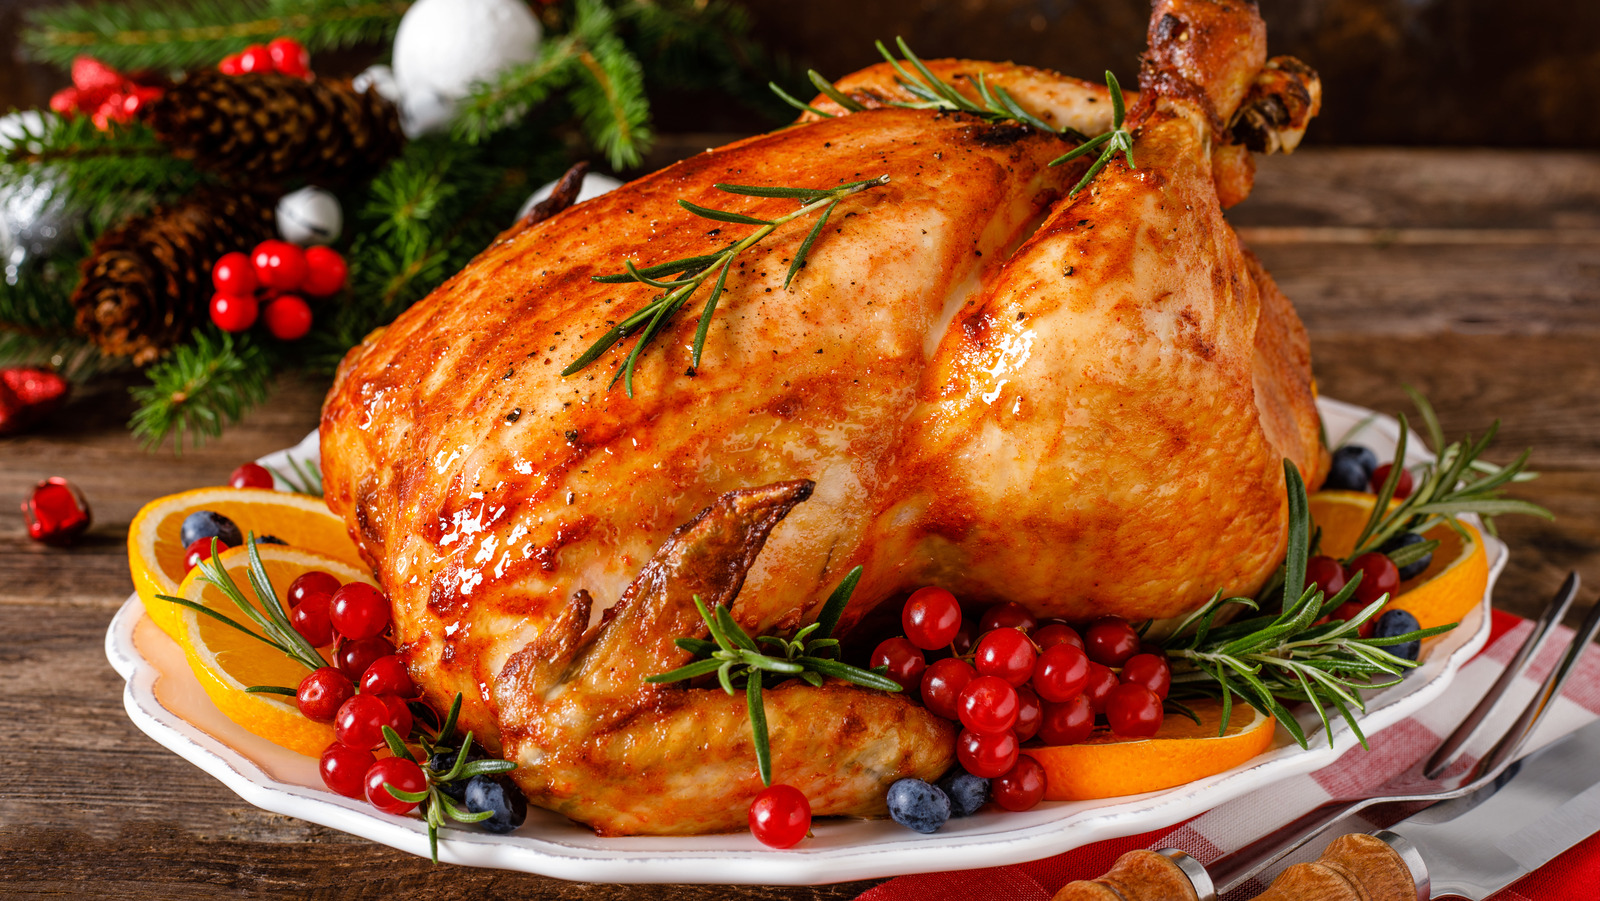 British Christmas Dinner Is At Risk Of Being Cancelled Because Of Bird Flu